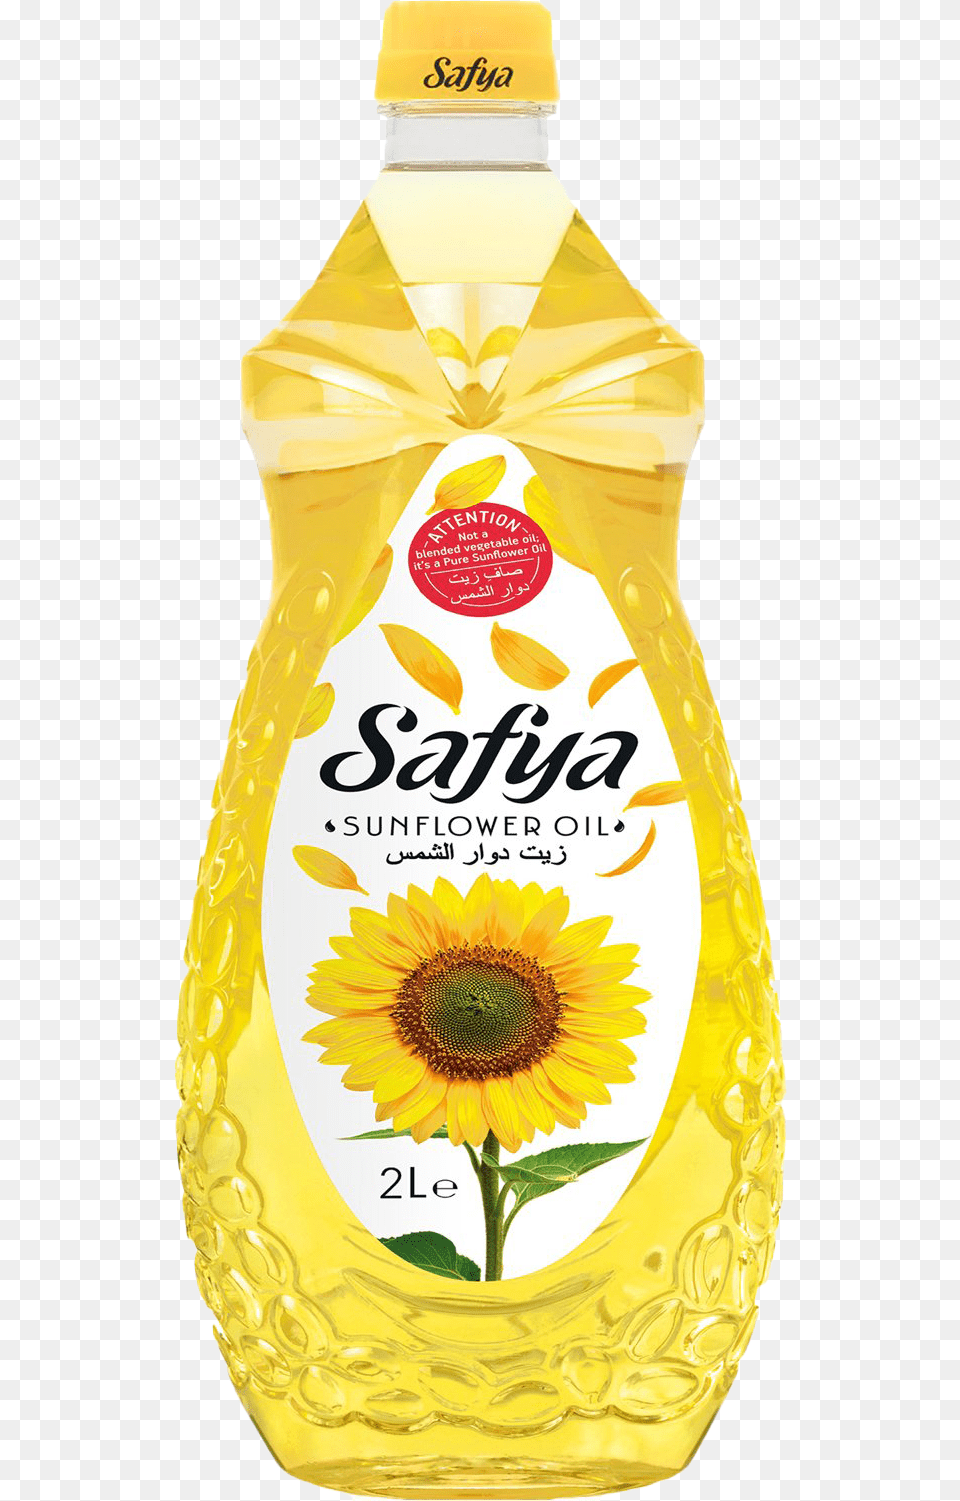 Sunflower Oil Transparent Background Bottle, Cooking Oil, Food, Cosmetics, Perfume Free Png Download